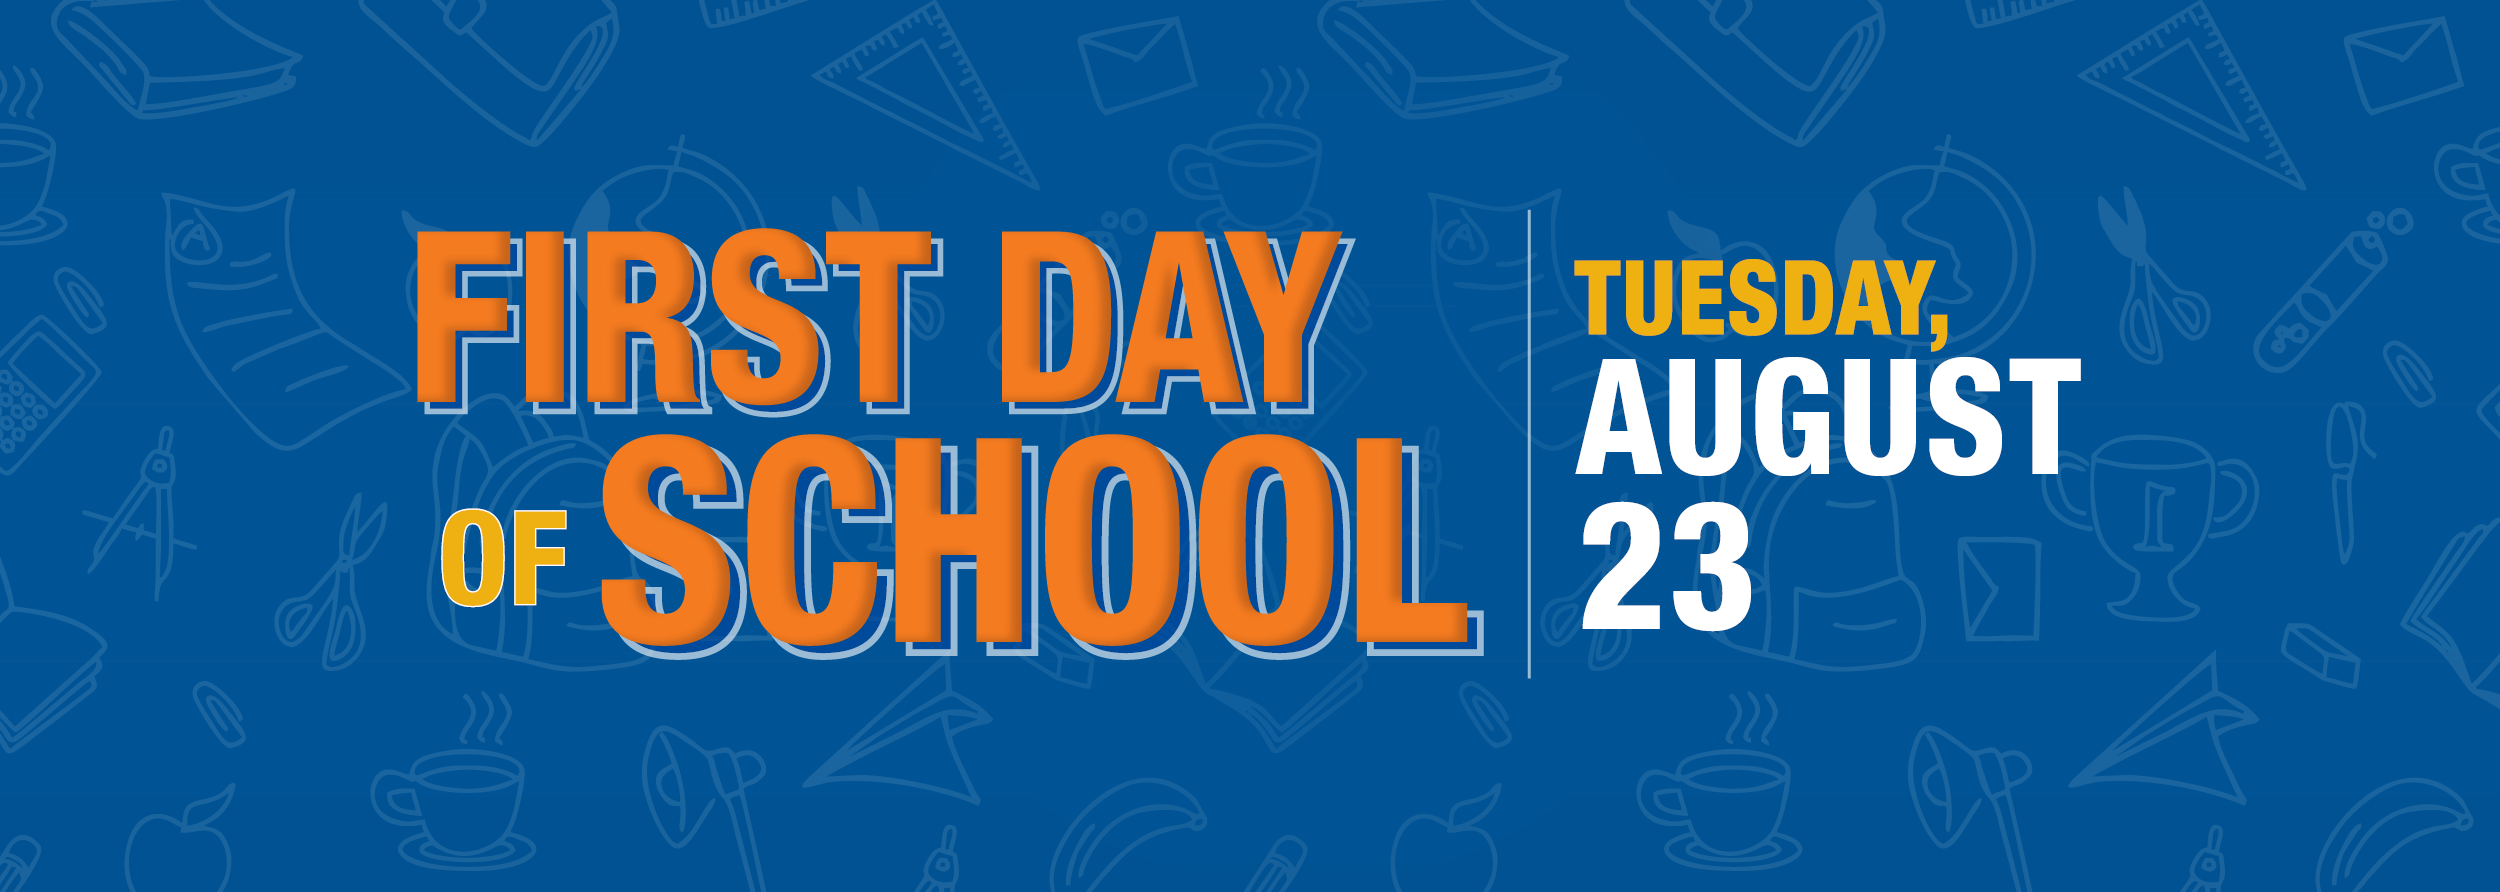 First Day of School Tuesday August 23